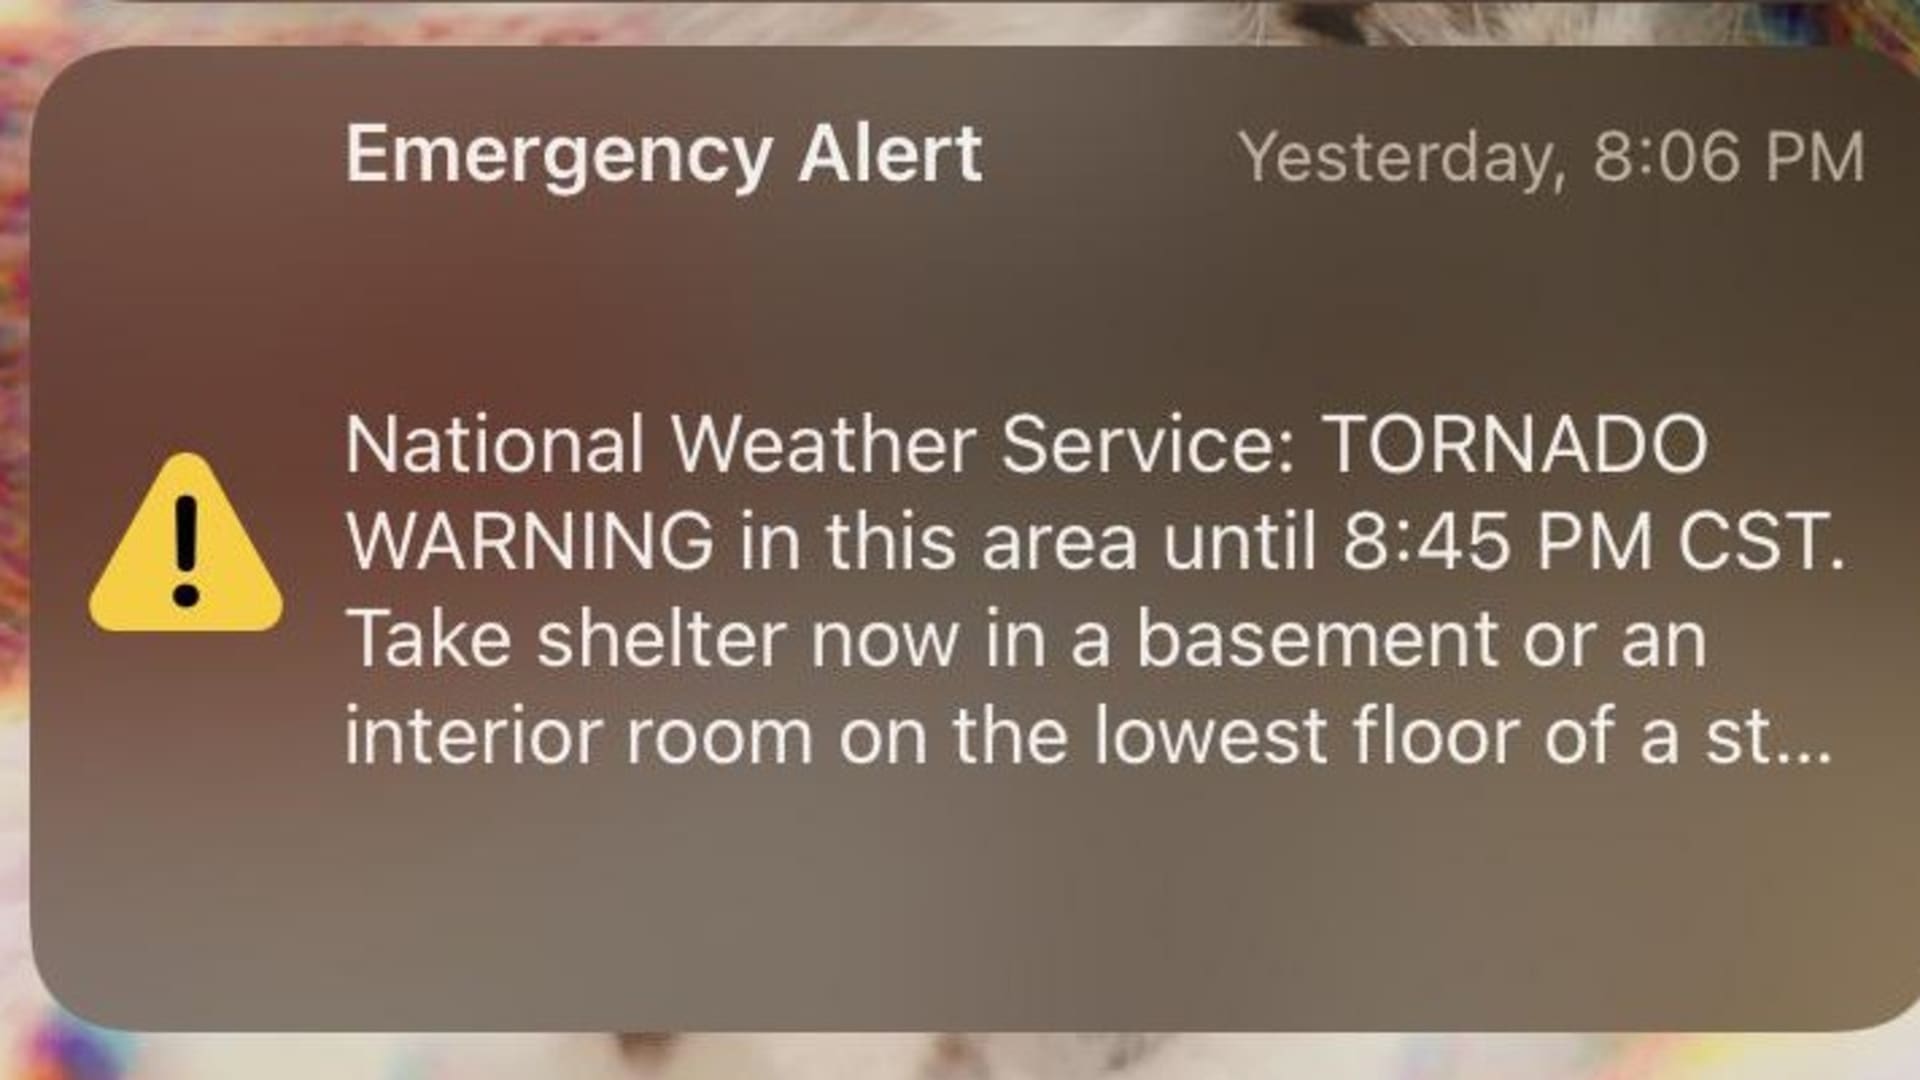 At 8:06 p.m. local time, the National Weather Service sent out an emergency alert of a tornado warning in the area.